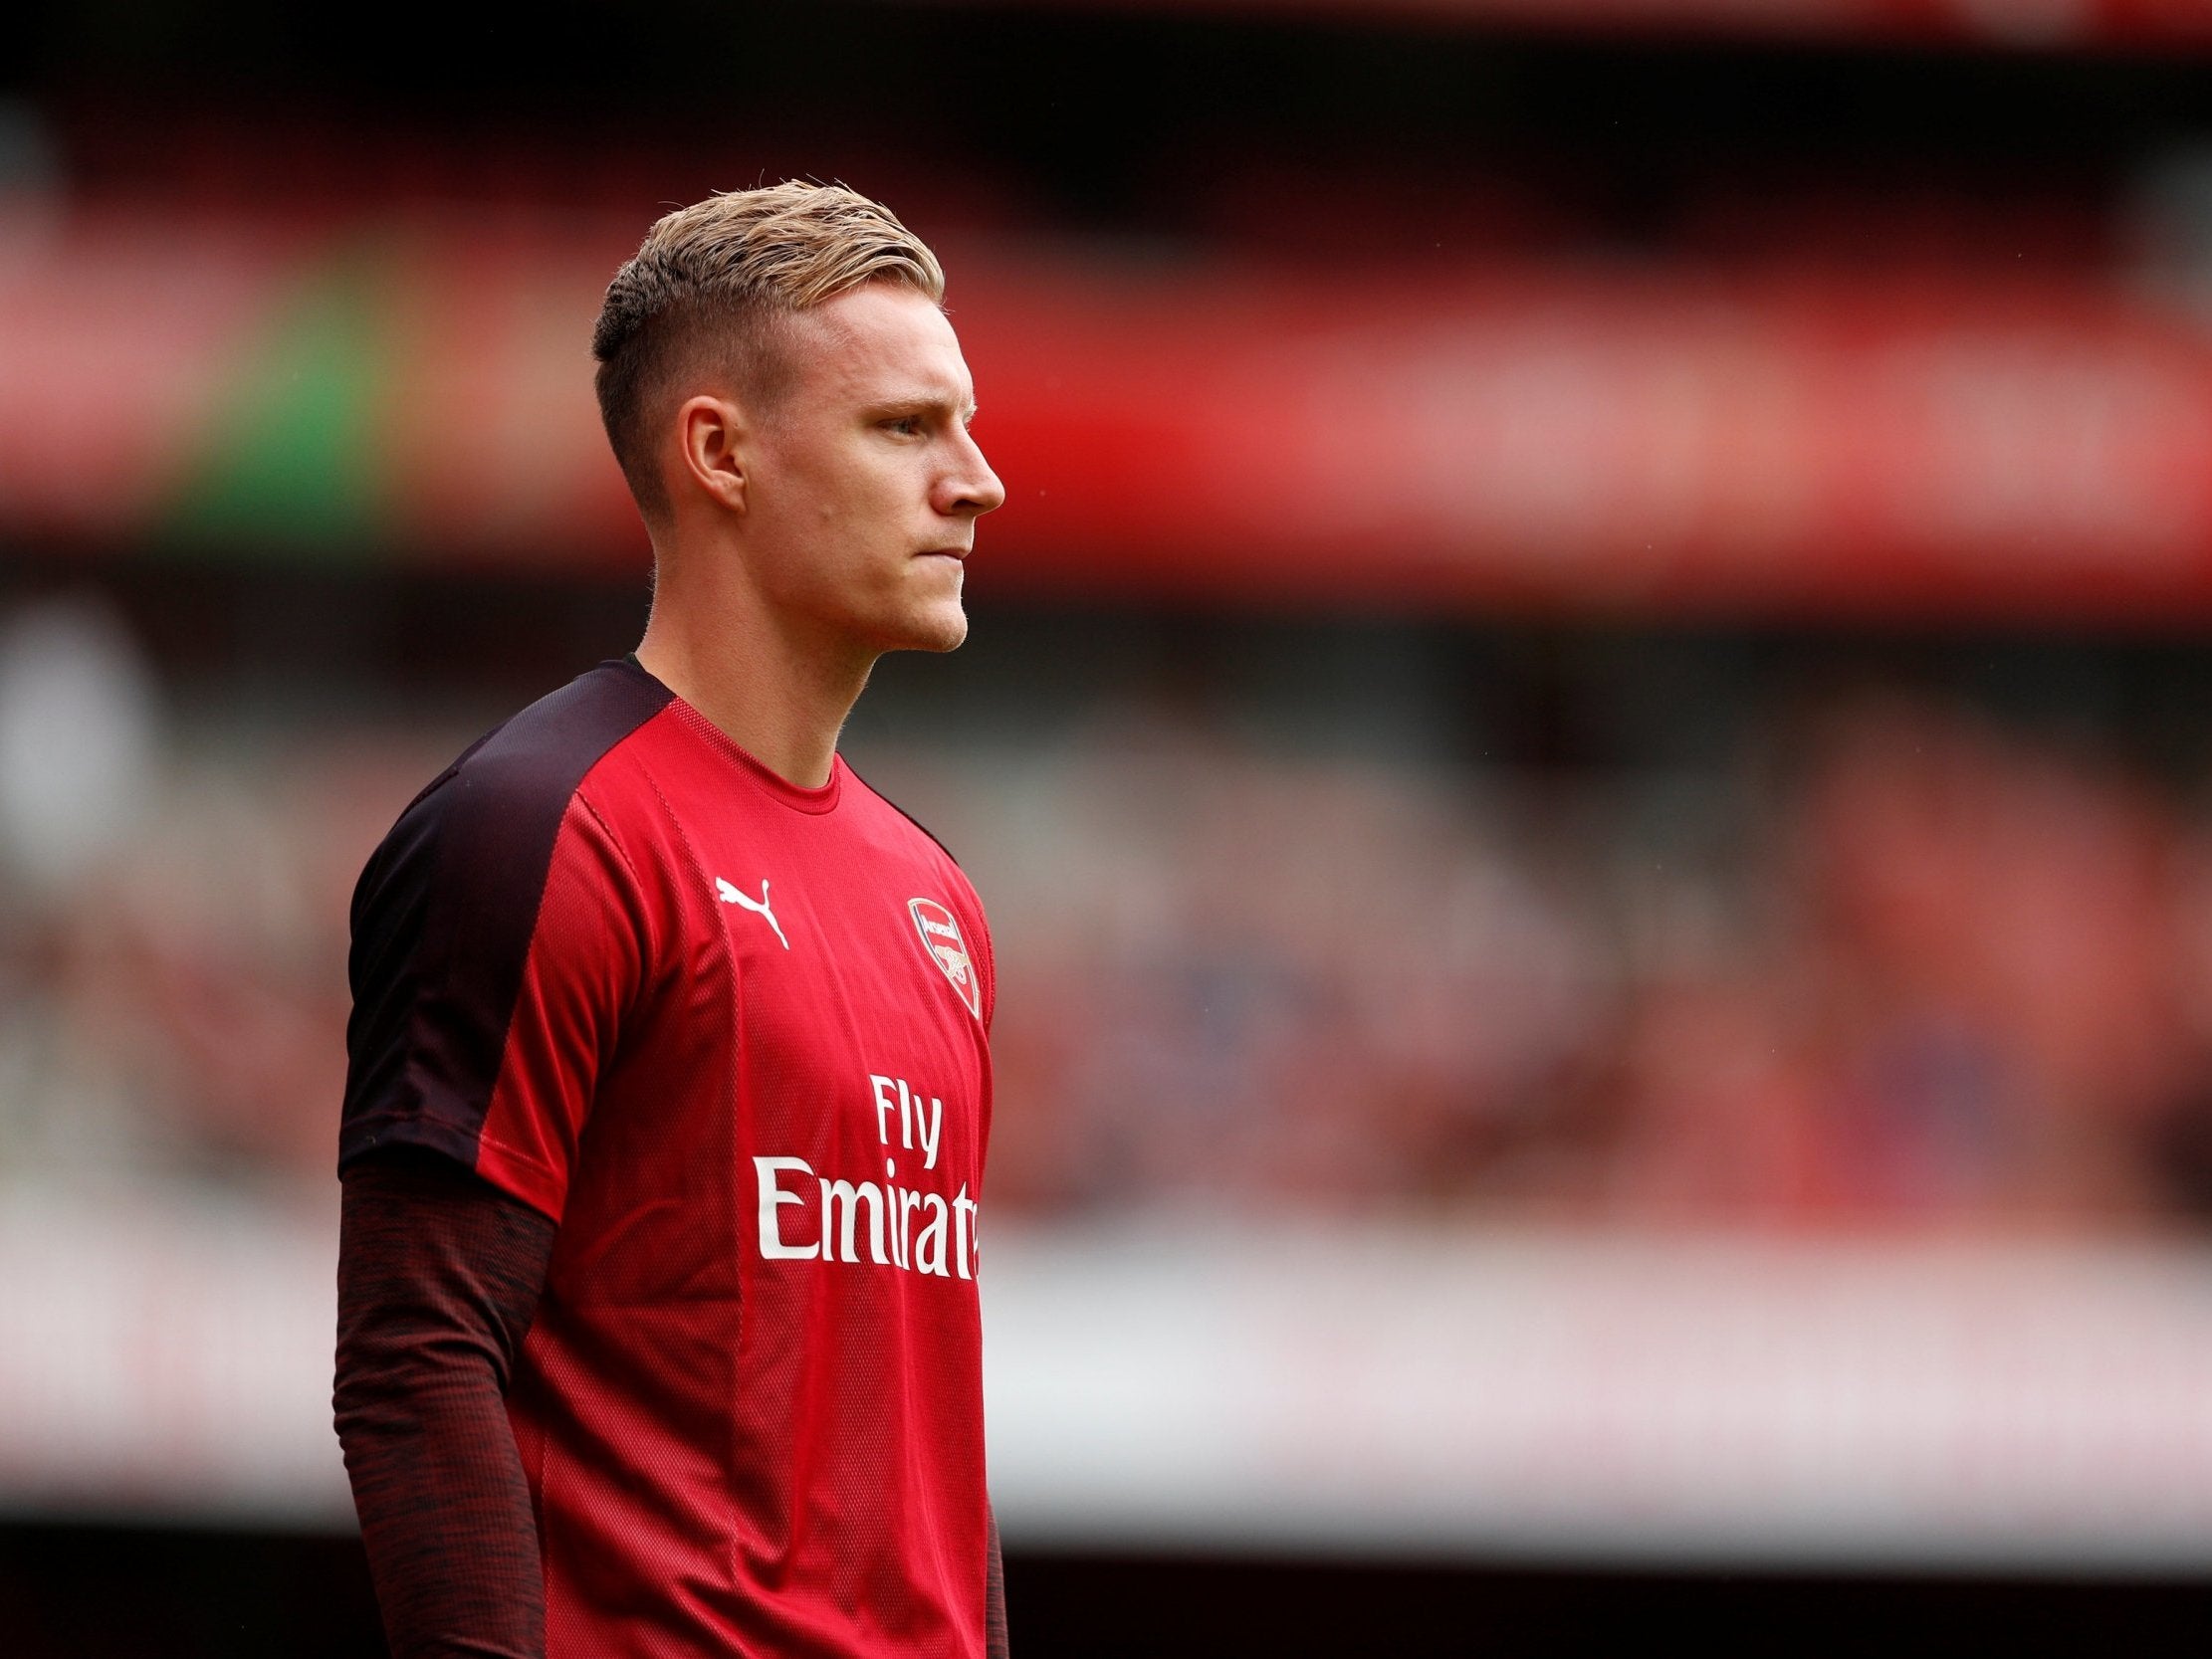 Bernd Leno is yet to make his Arsenal debut after joining for £20m